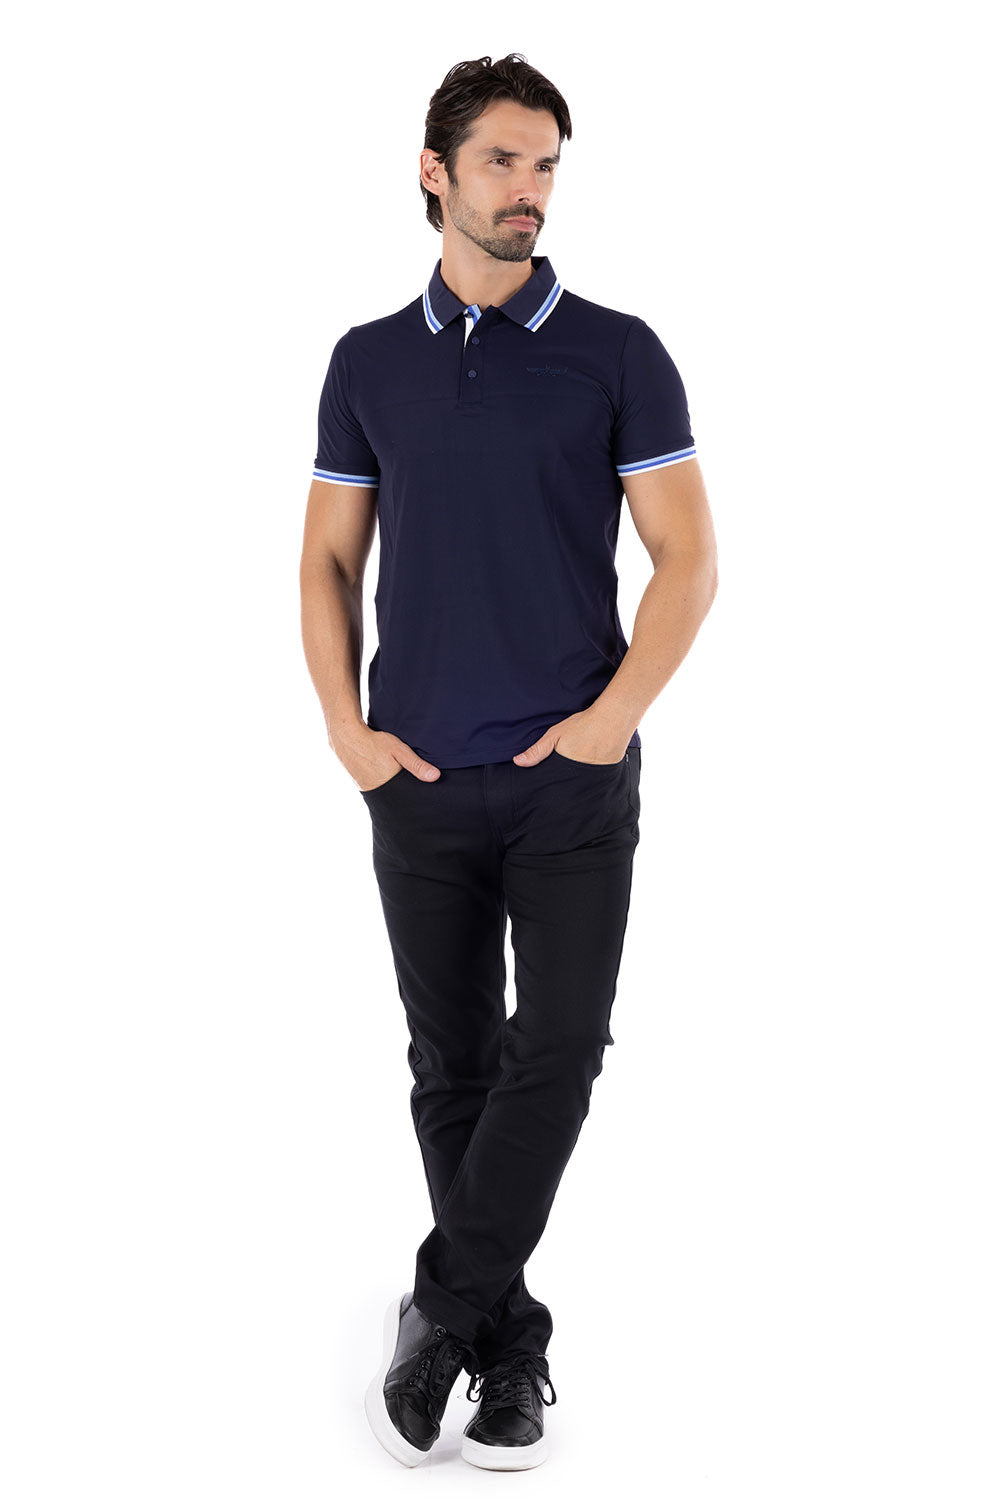 Barabas Men's Solid Color Linear Collar and Cuff Polo Shirts 3PS127 Navy